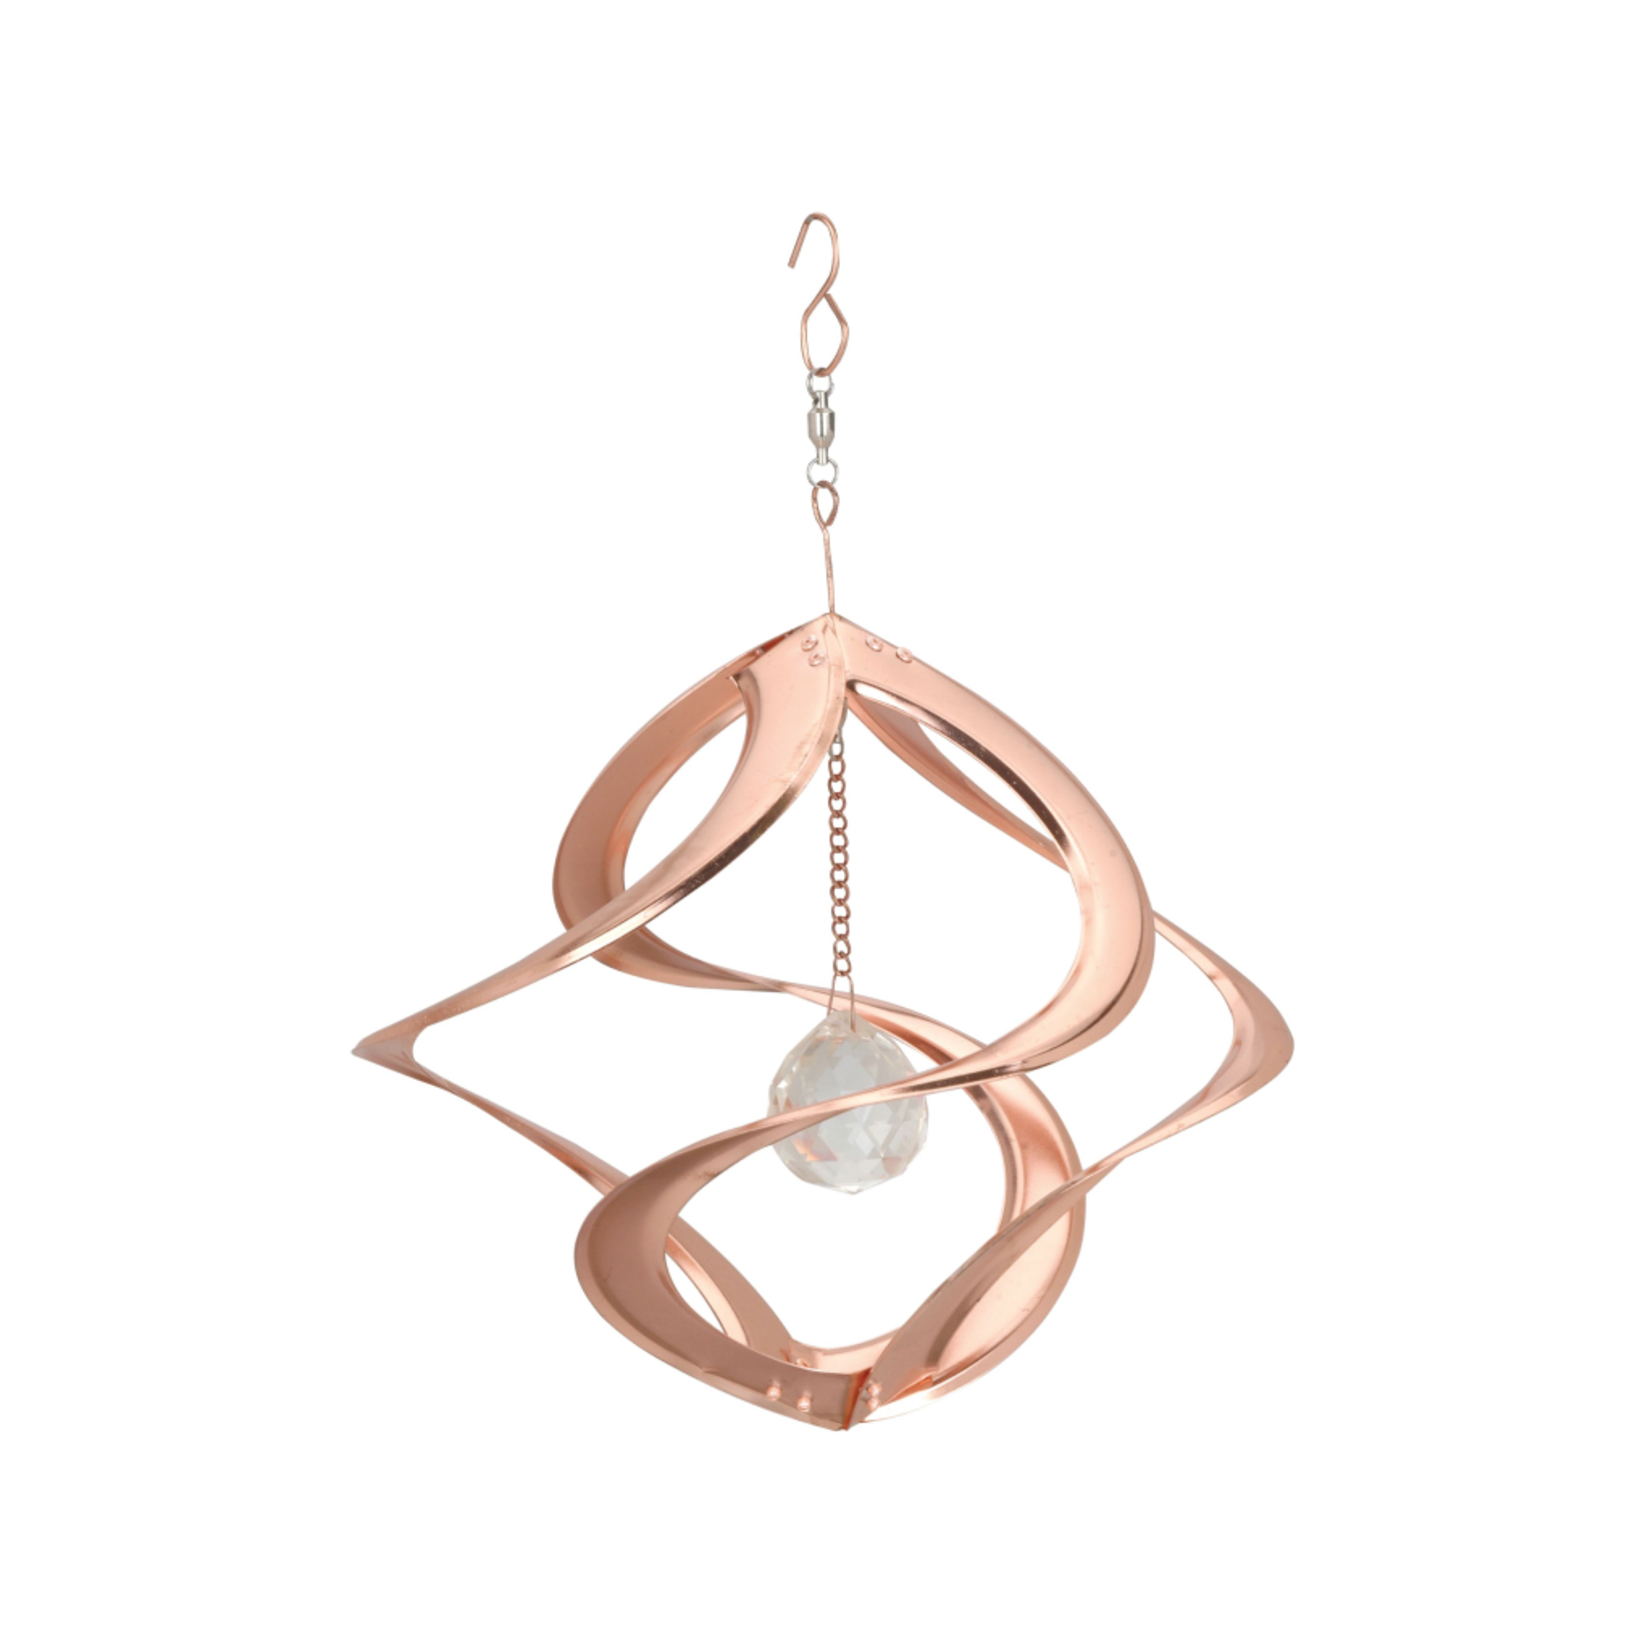 Bear Den Helixes Hanging Helix - 11 Inch Copper with Crystal